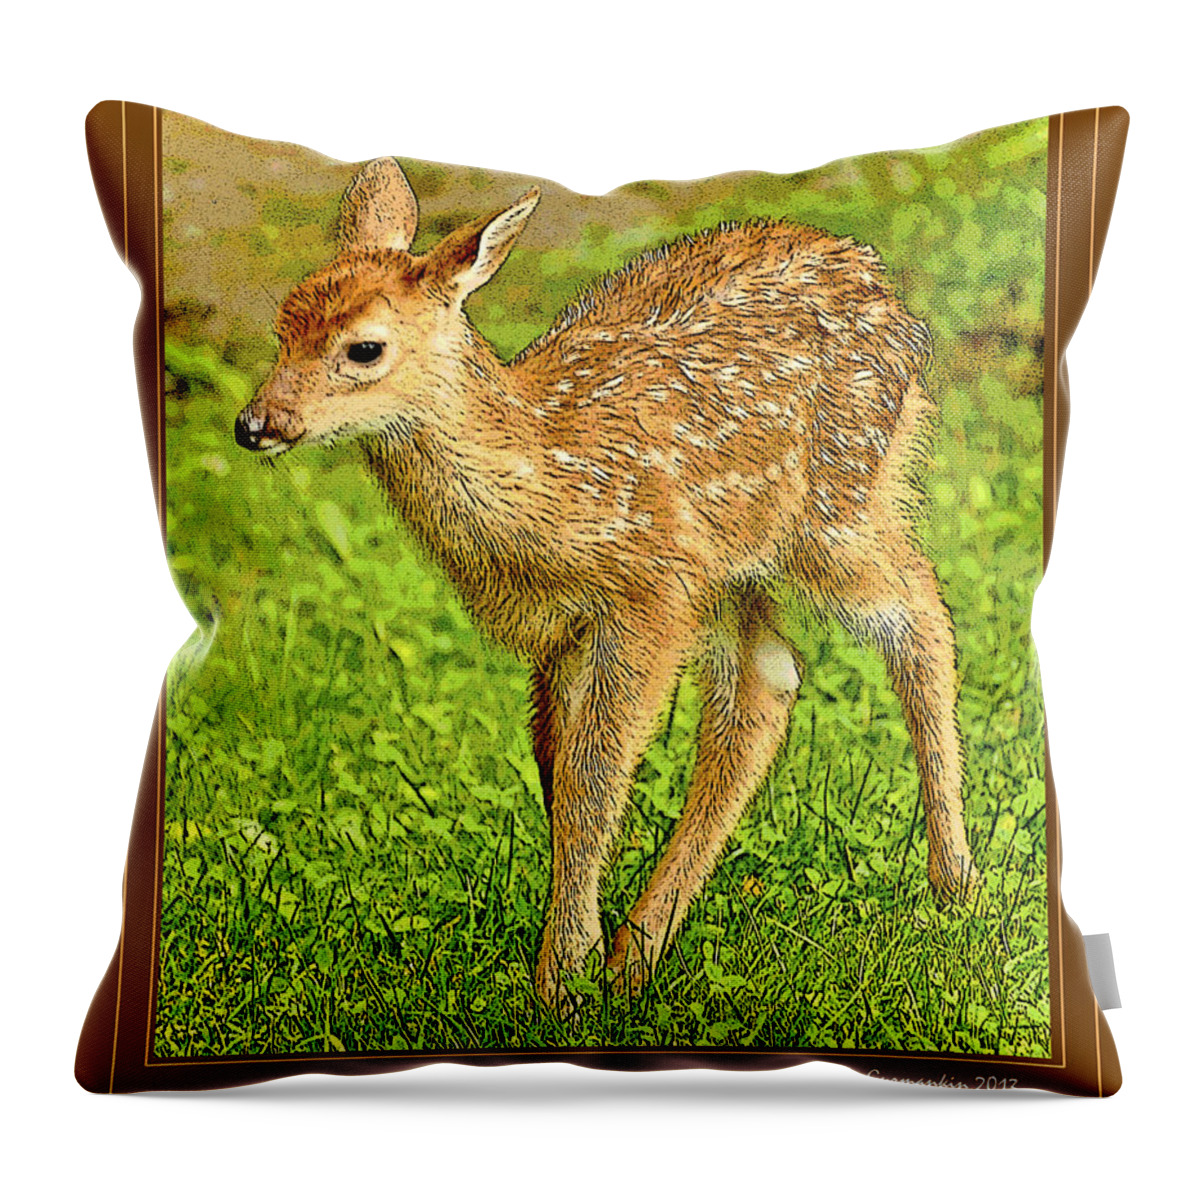 White-tailed Deer Throw Pillow featuring the photograph Fawn Poster Image by A Macarthur Gurmankin